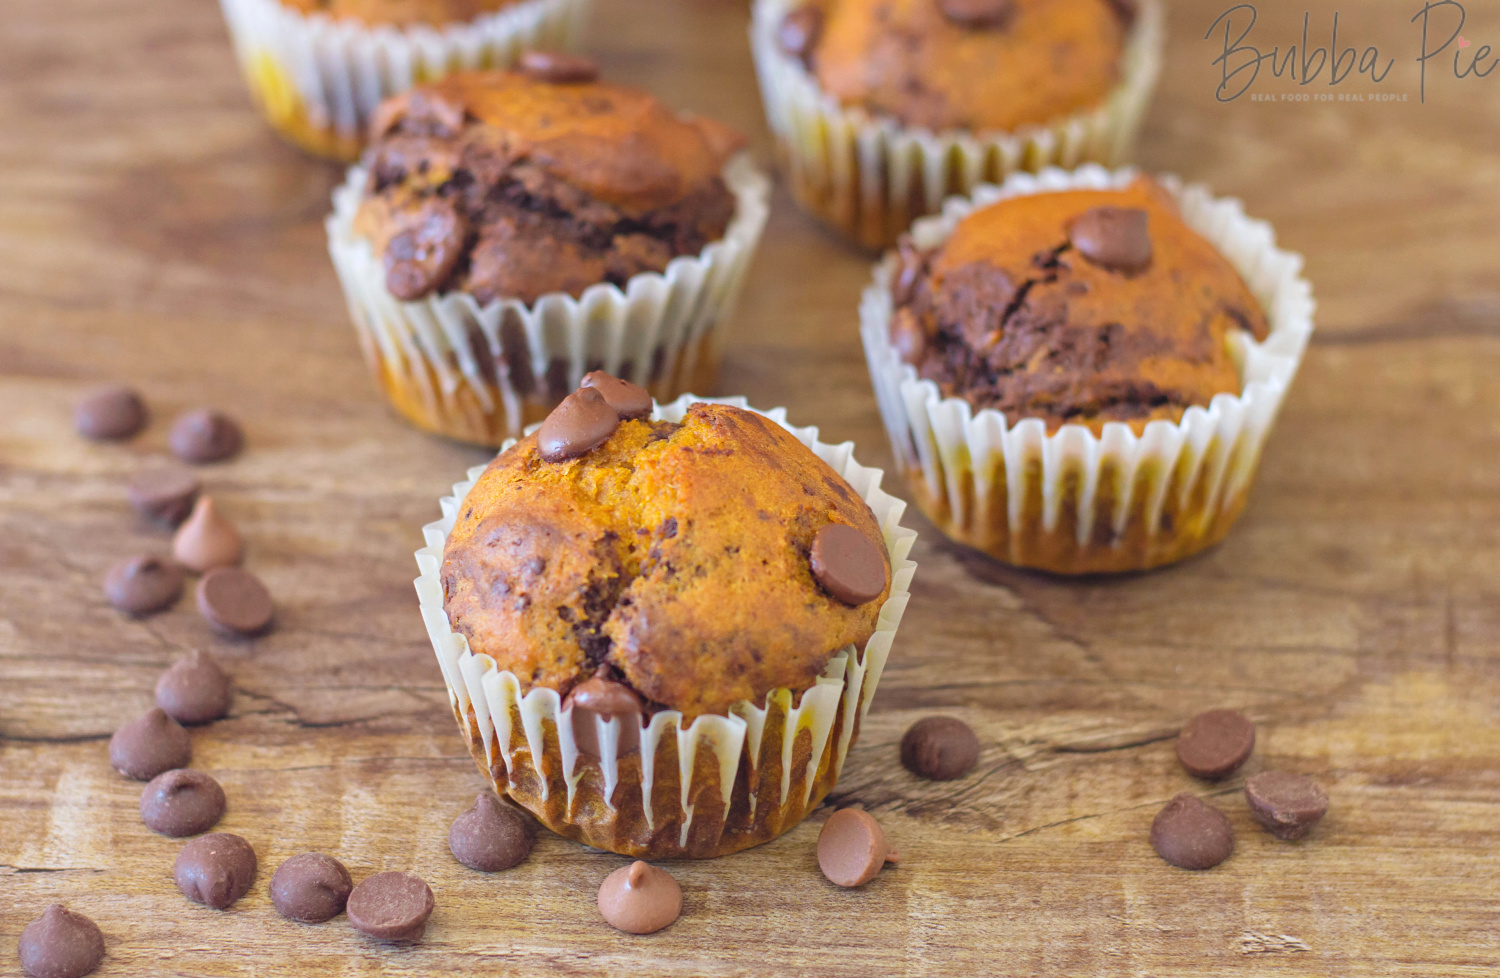 Pumpkin Chocolate Chip Muffins sitting on a plate with chocolate chips make a great thanksgiving dessert.